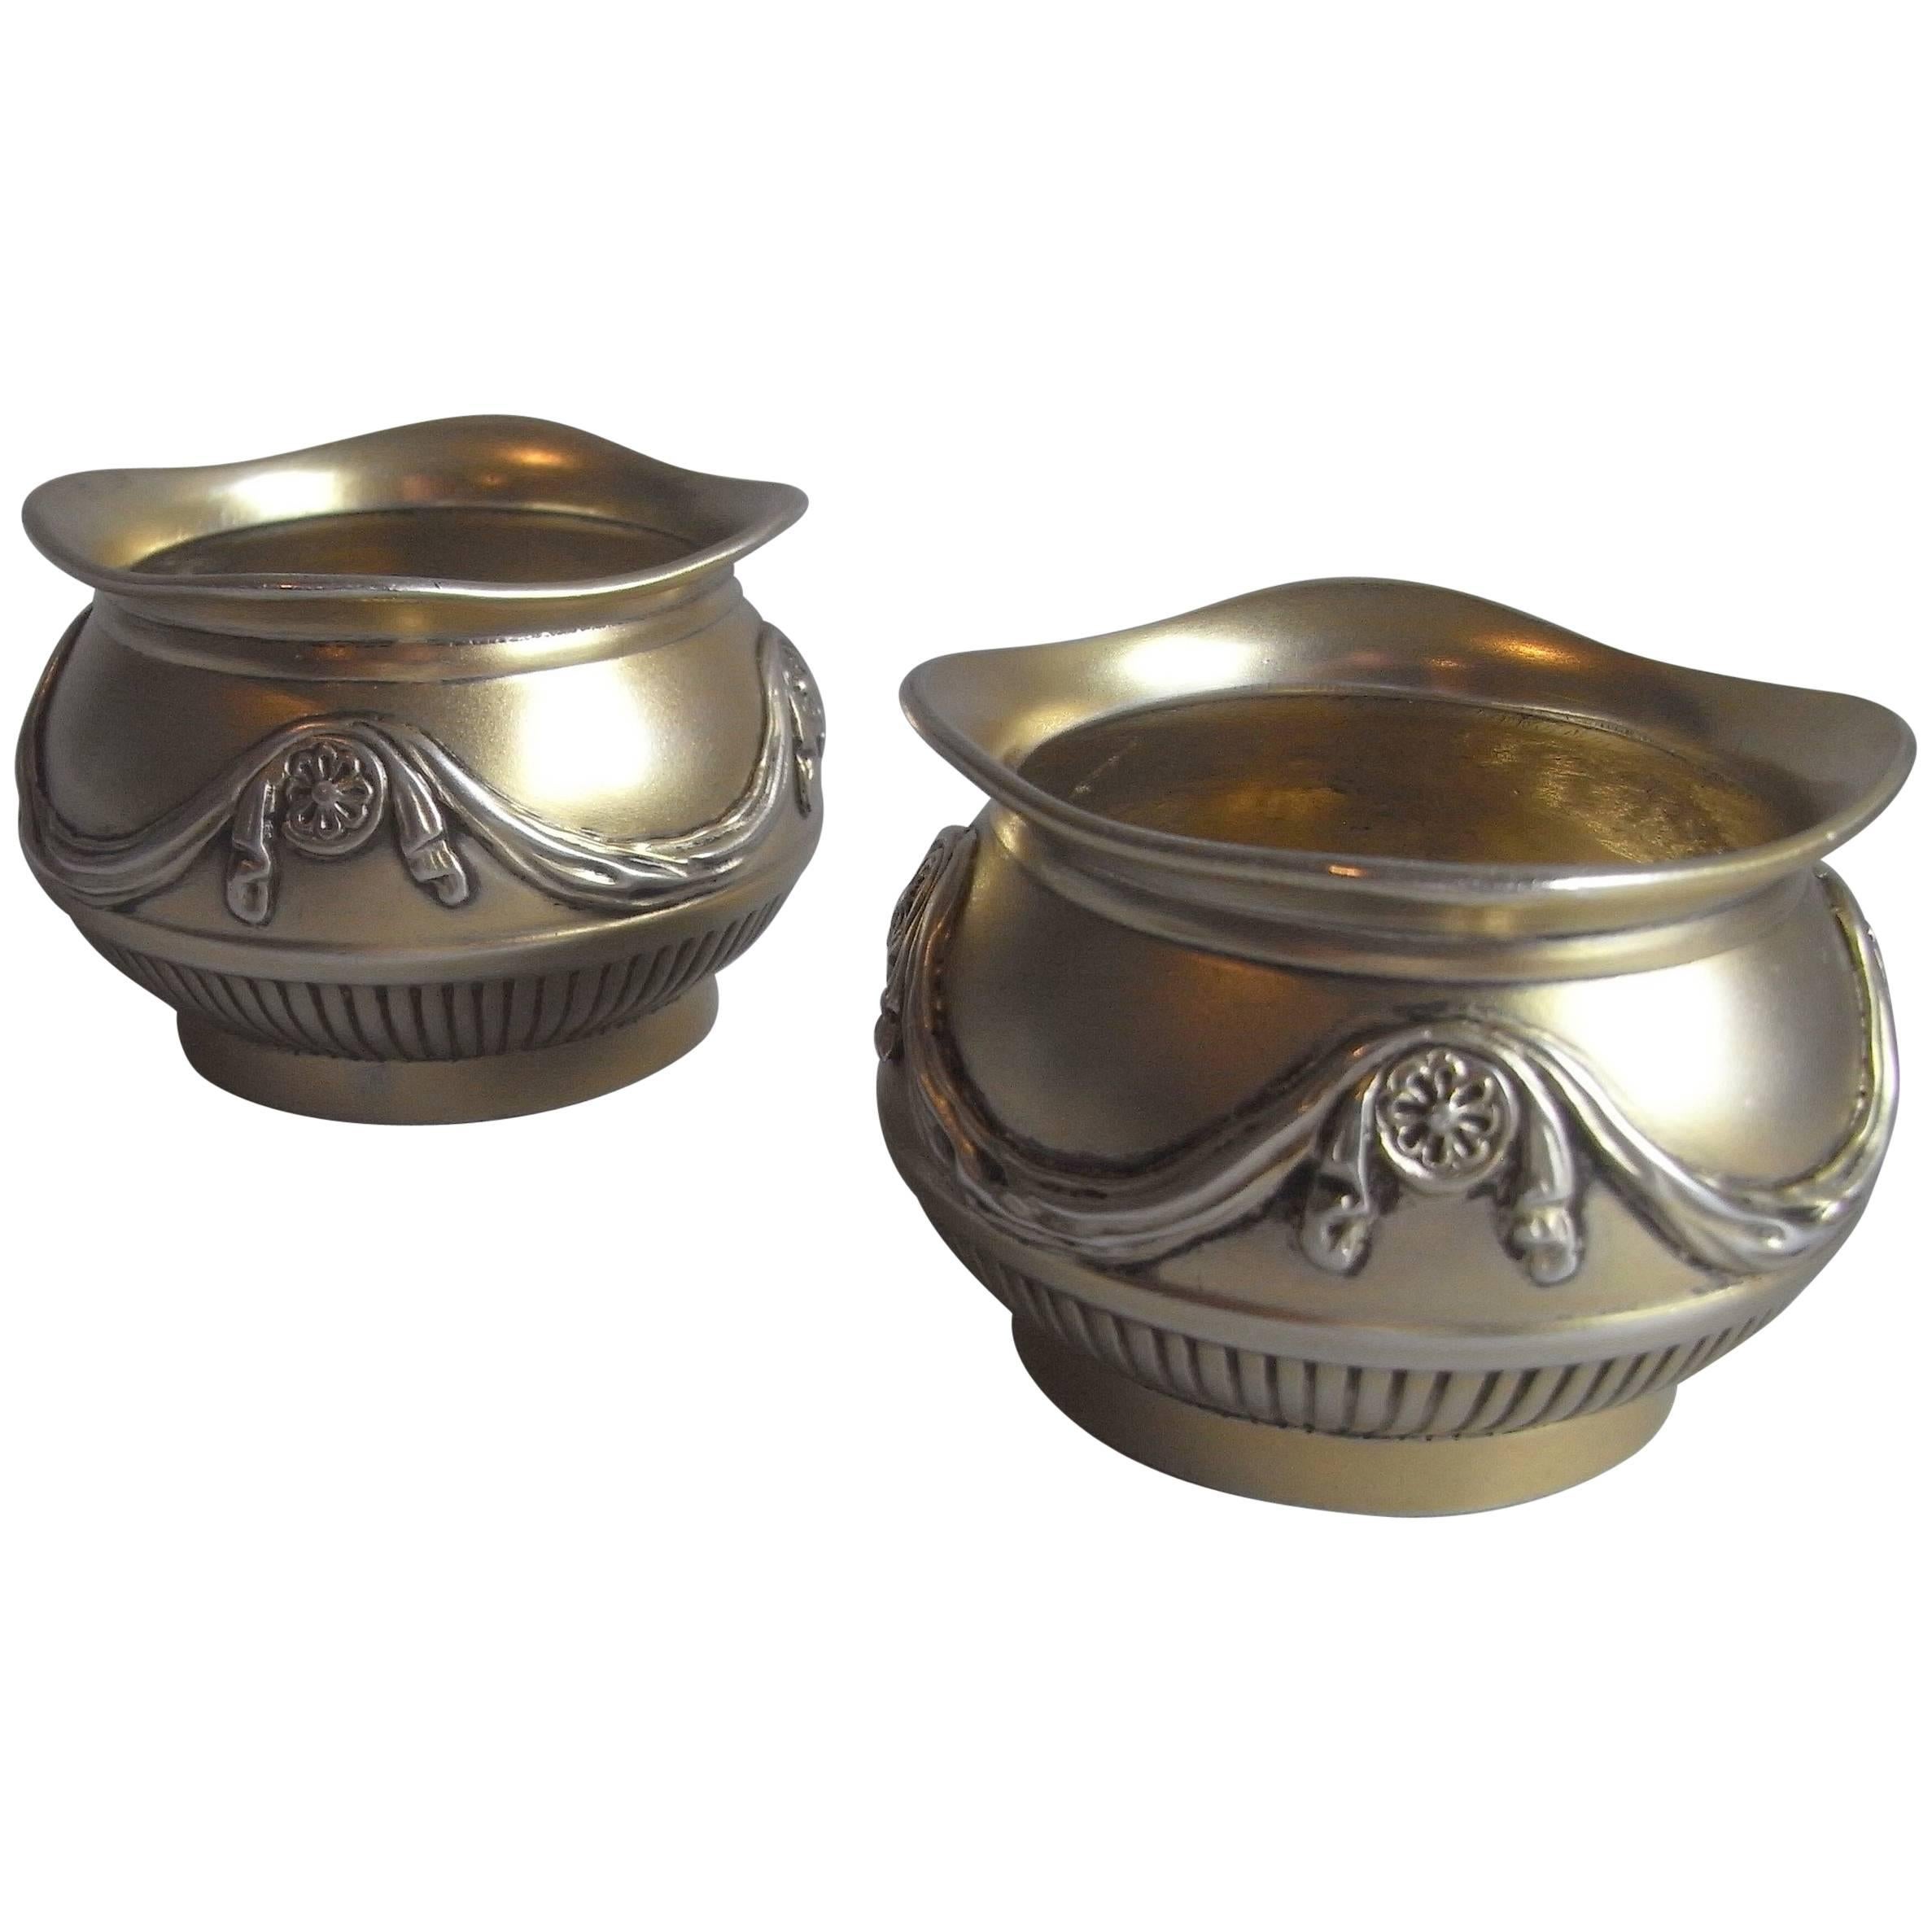 Very Fine Pair of Silver Gilt Neoclassical Revival Salt Cellars Made in Birmi For Sale